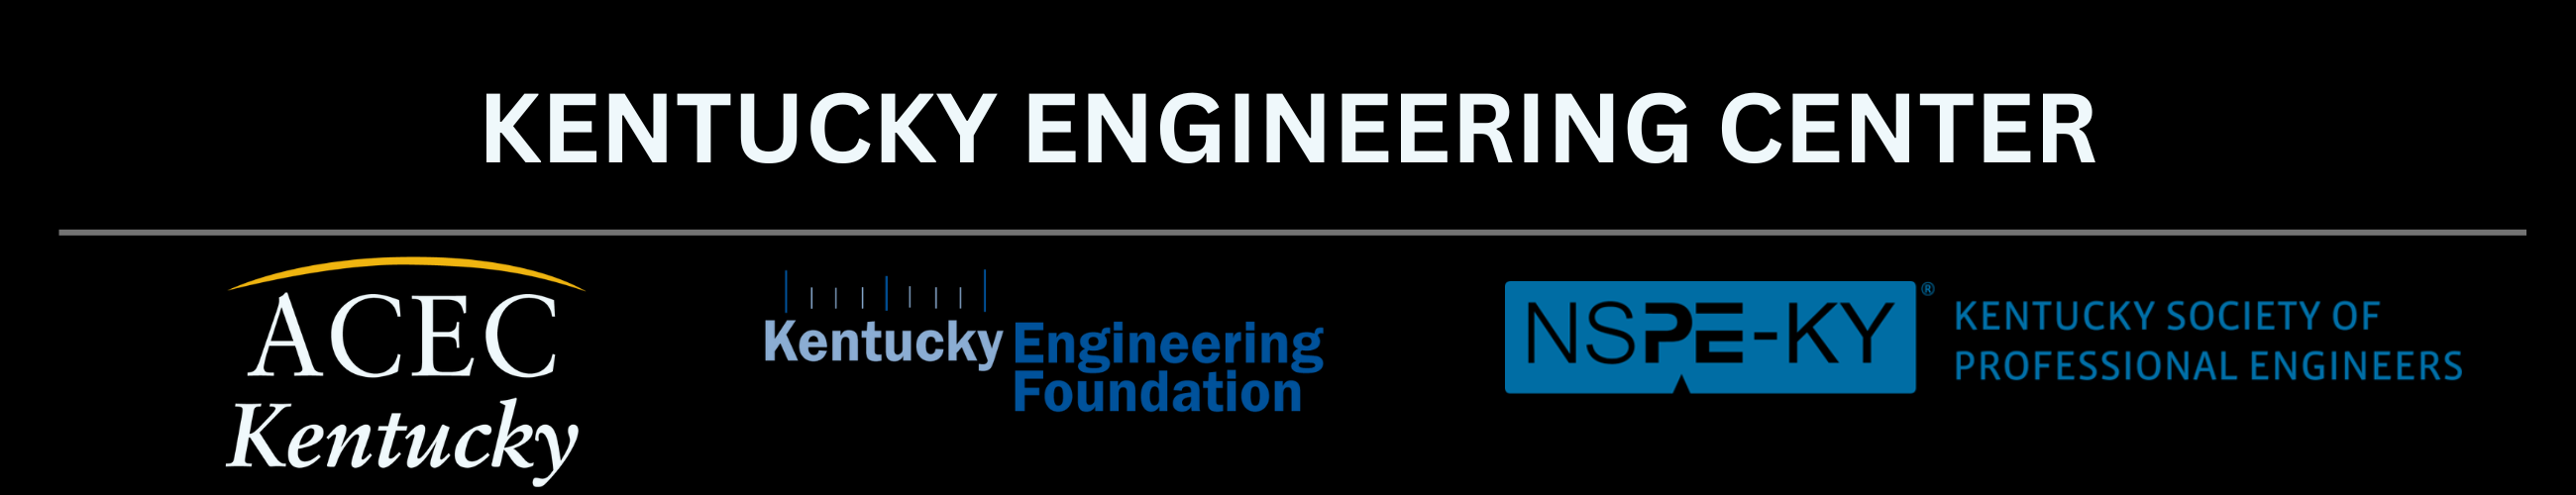 Kentucky Engineering Center logo with ACEC Kentucky, Kentucky Engineering Foundation, NSPE-KY Kentucky Society of Professional Engineers